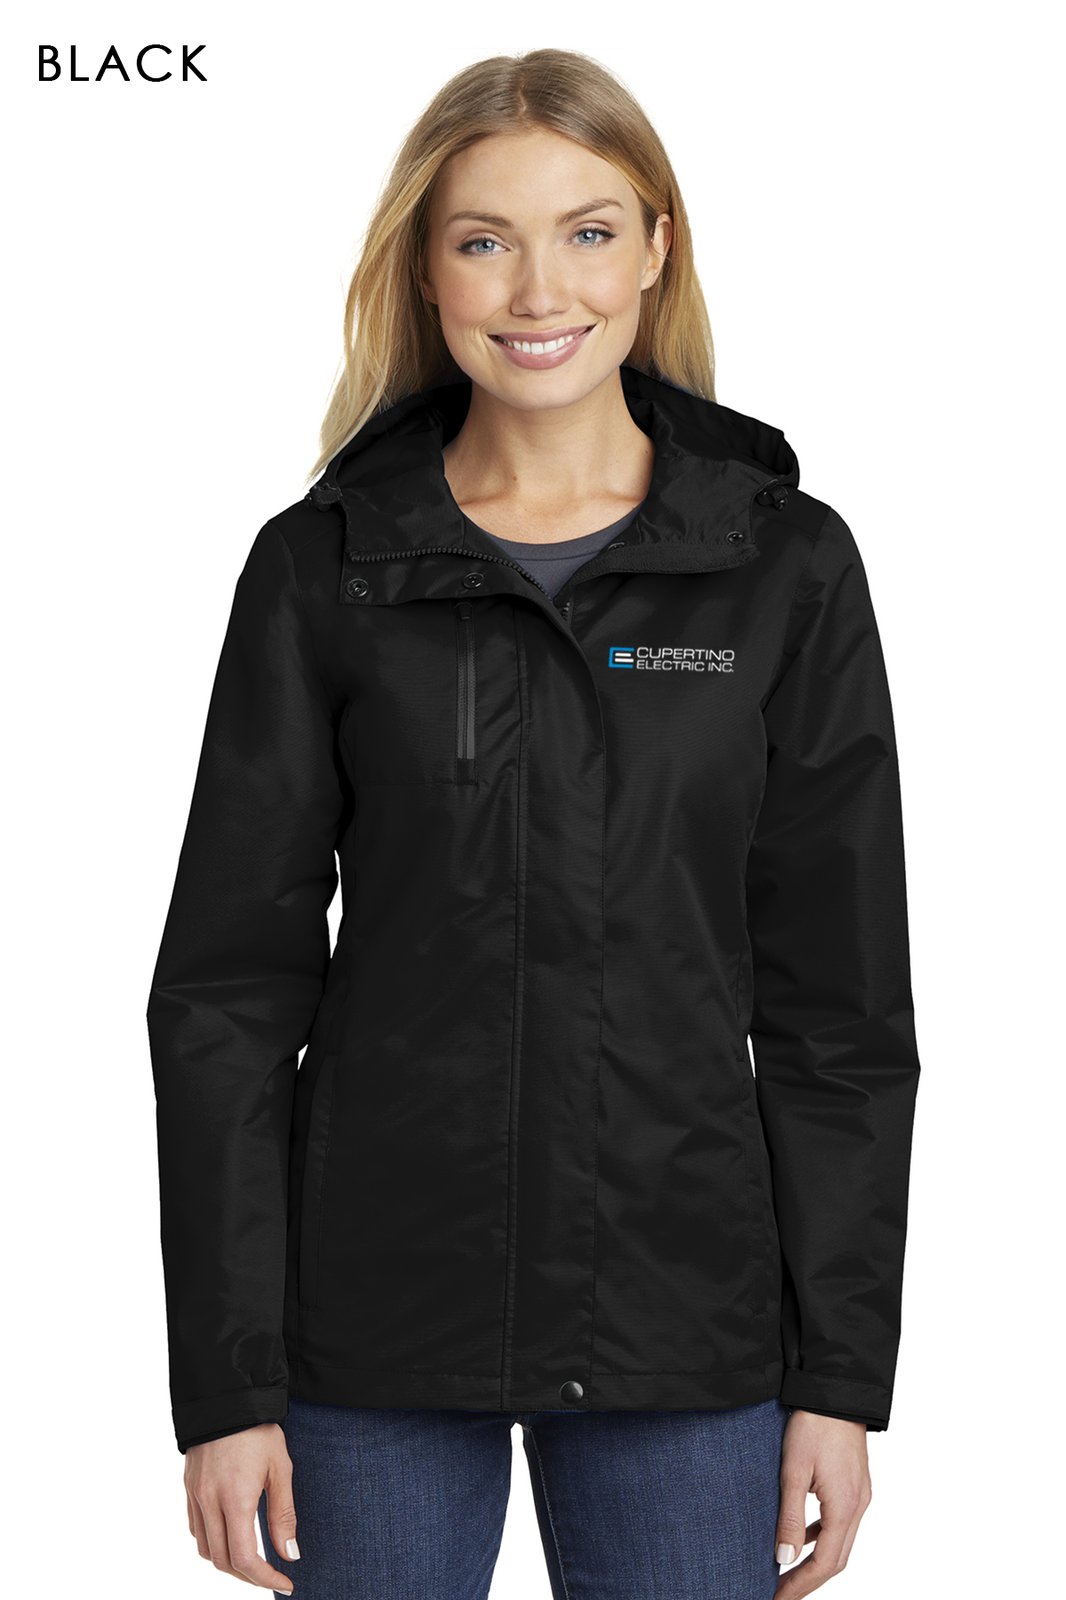 Port Authority Ladies All-Conditions Jacket, Product